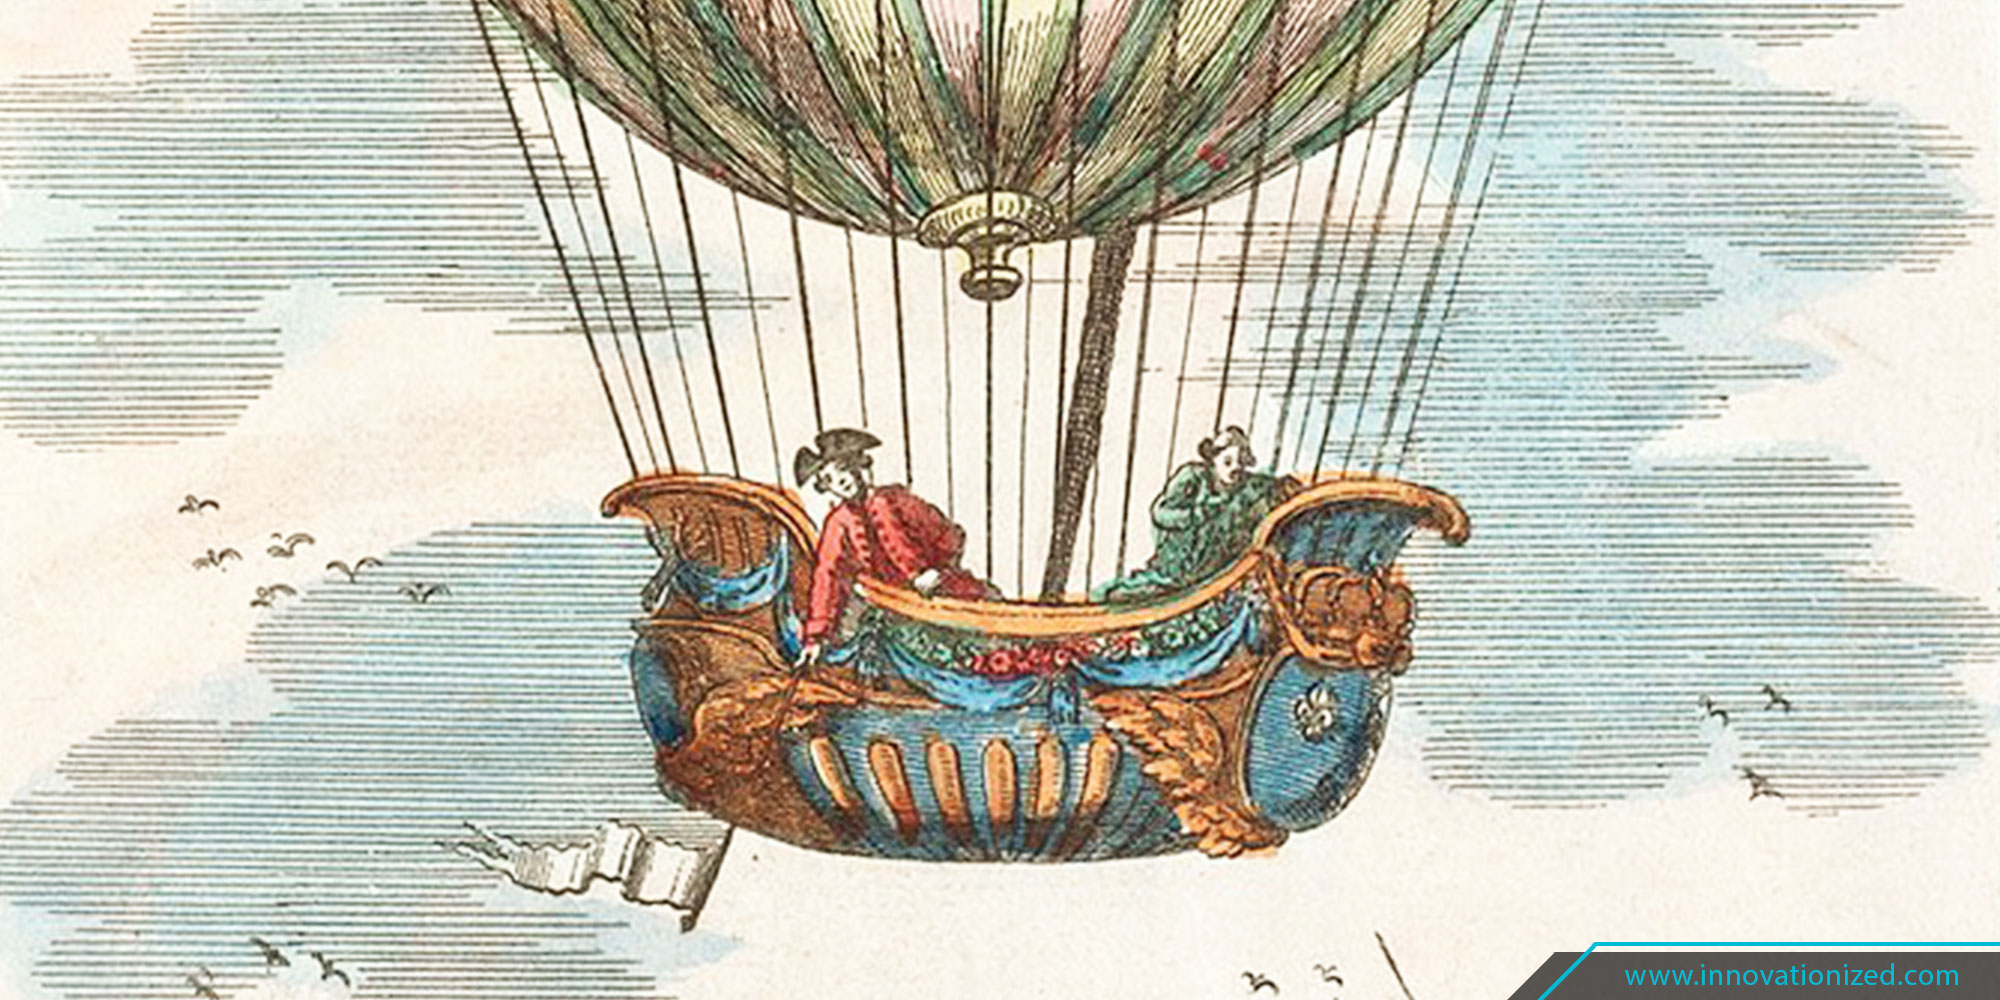 Early Flight: Hot Air and Hydrogen Balloons